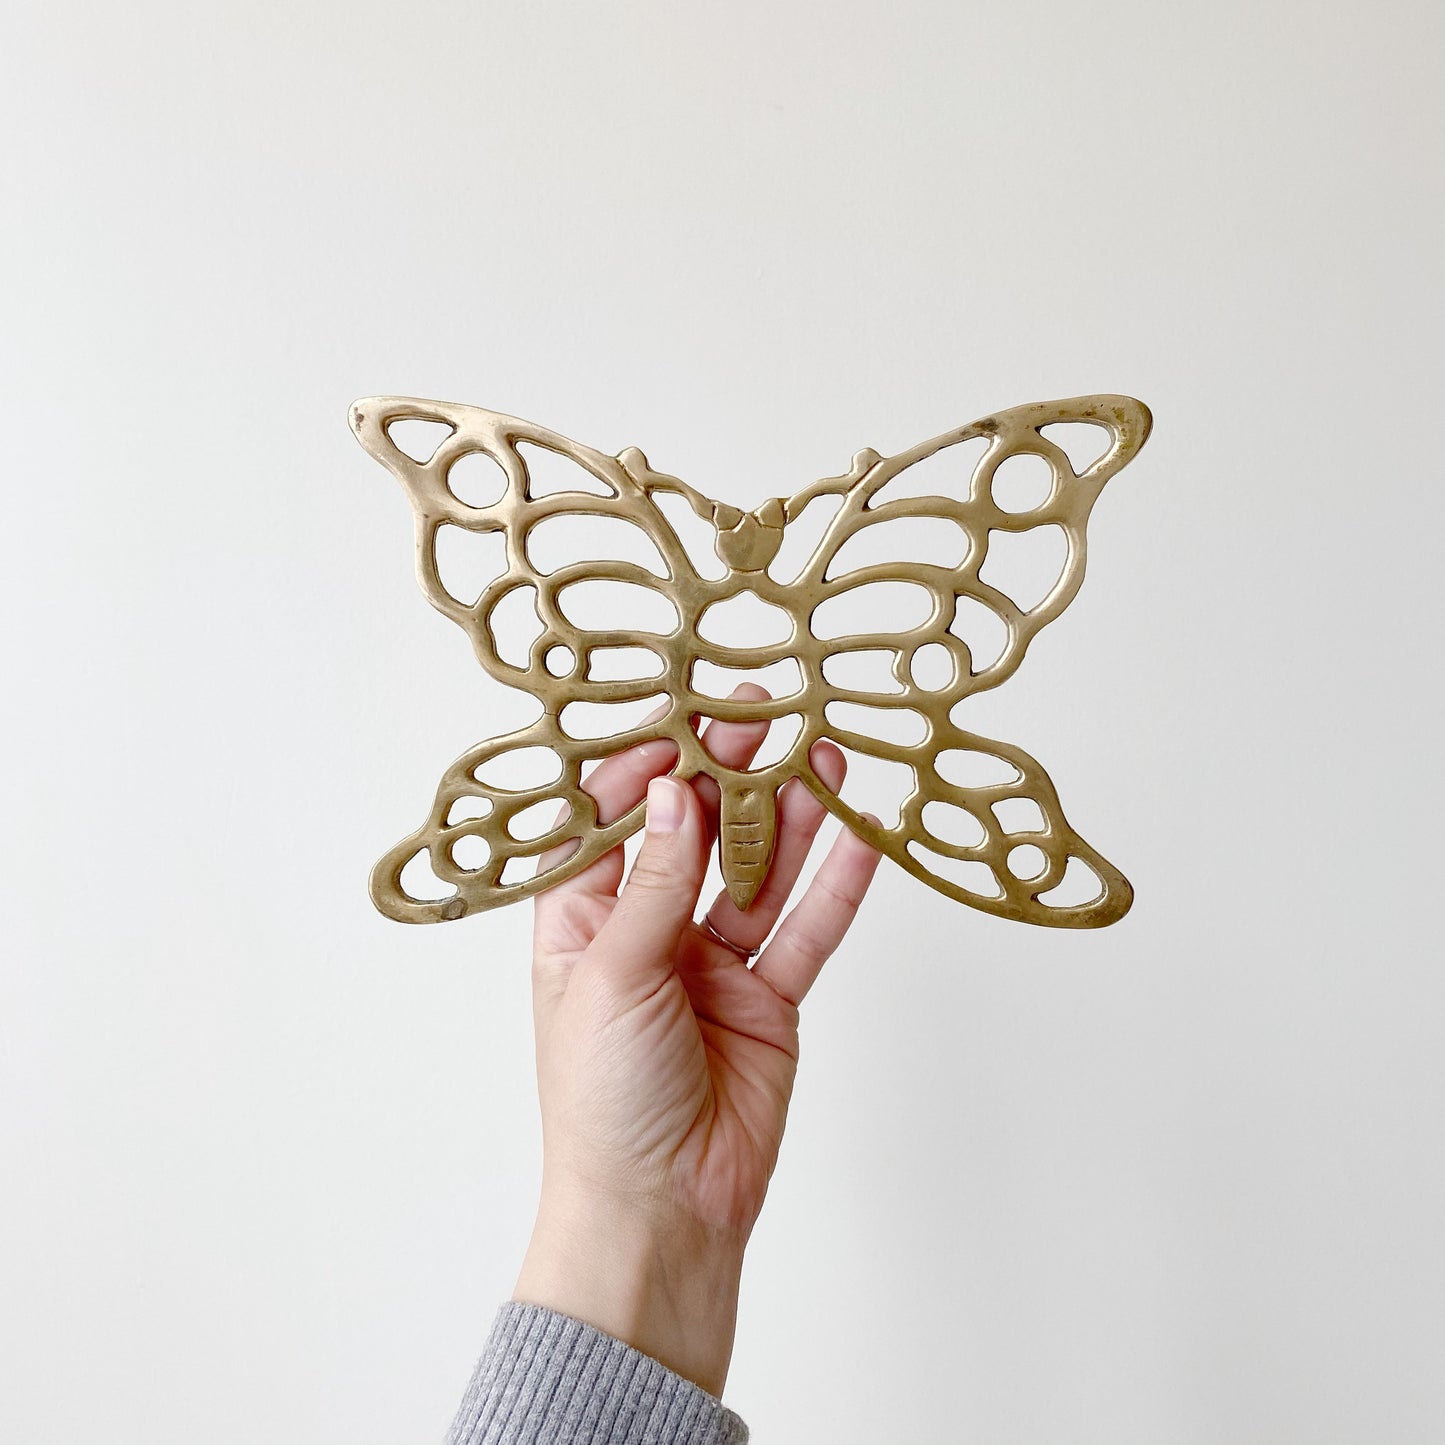 Vintage Solid Brass Butterfly Trivet / Wall Decor